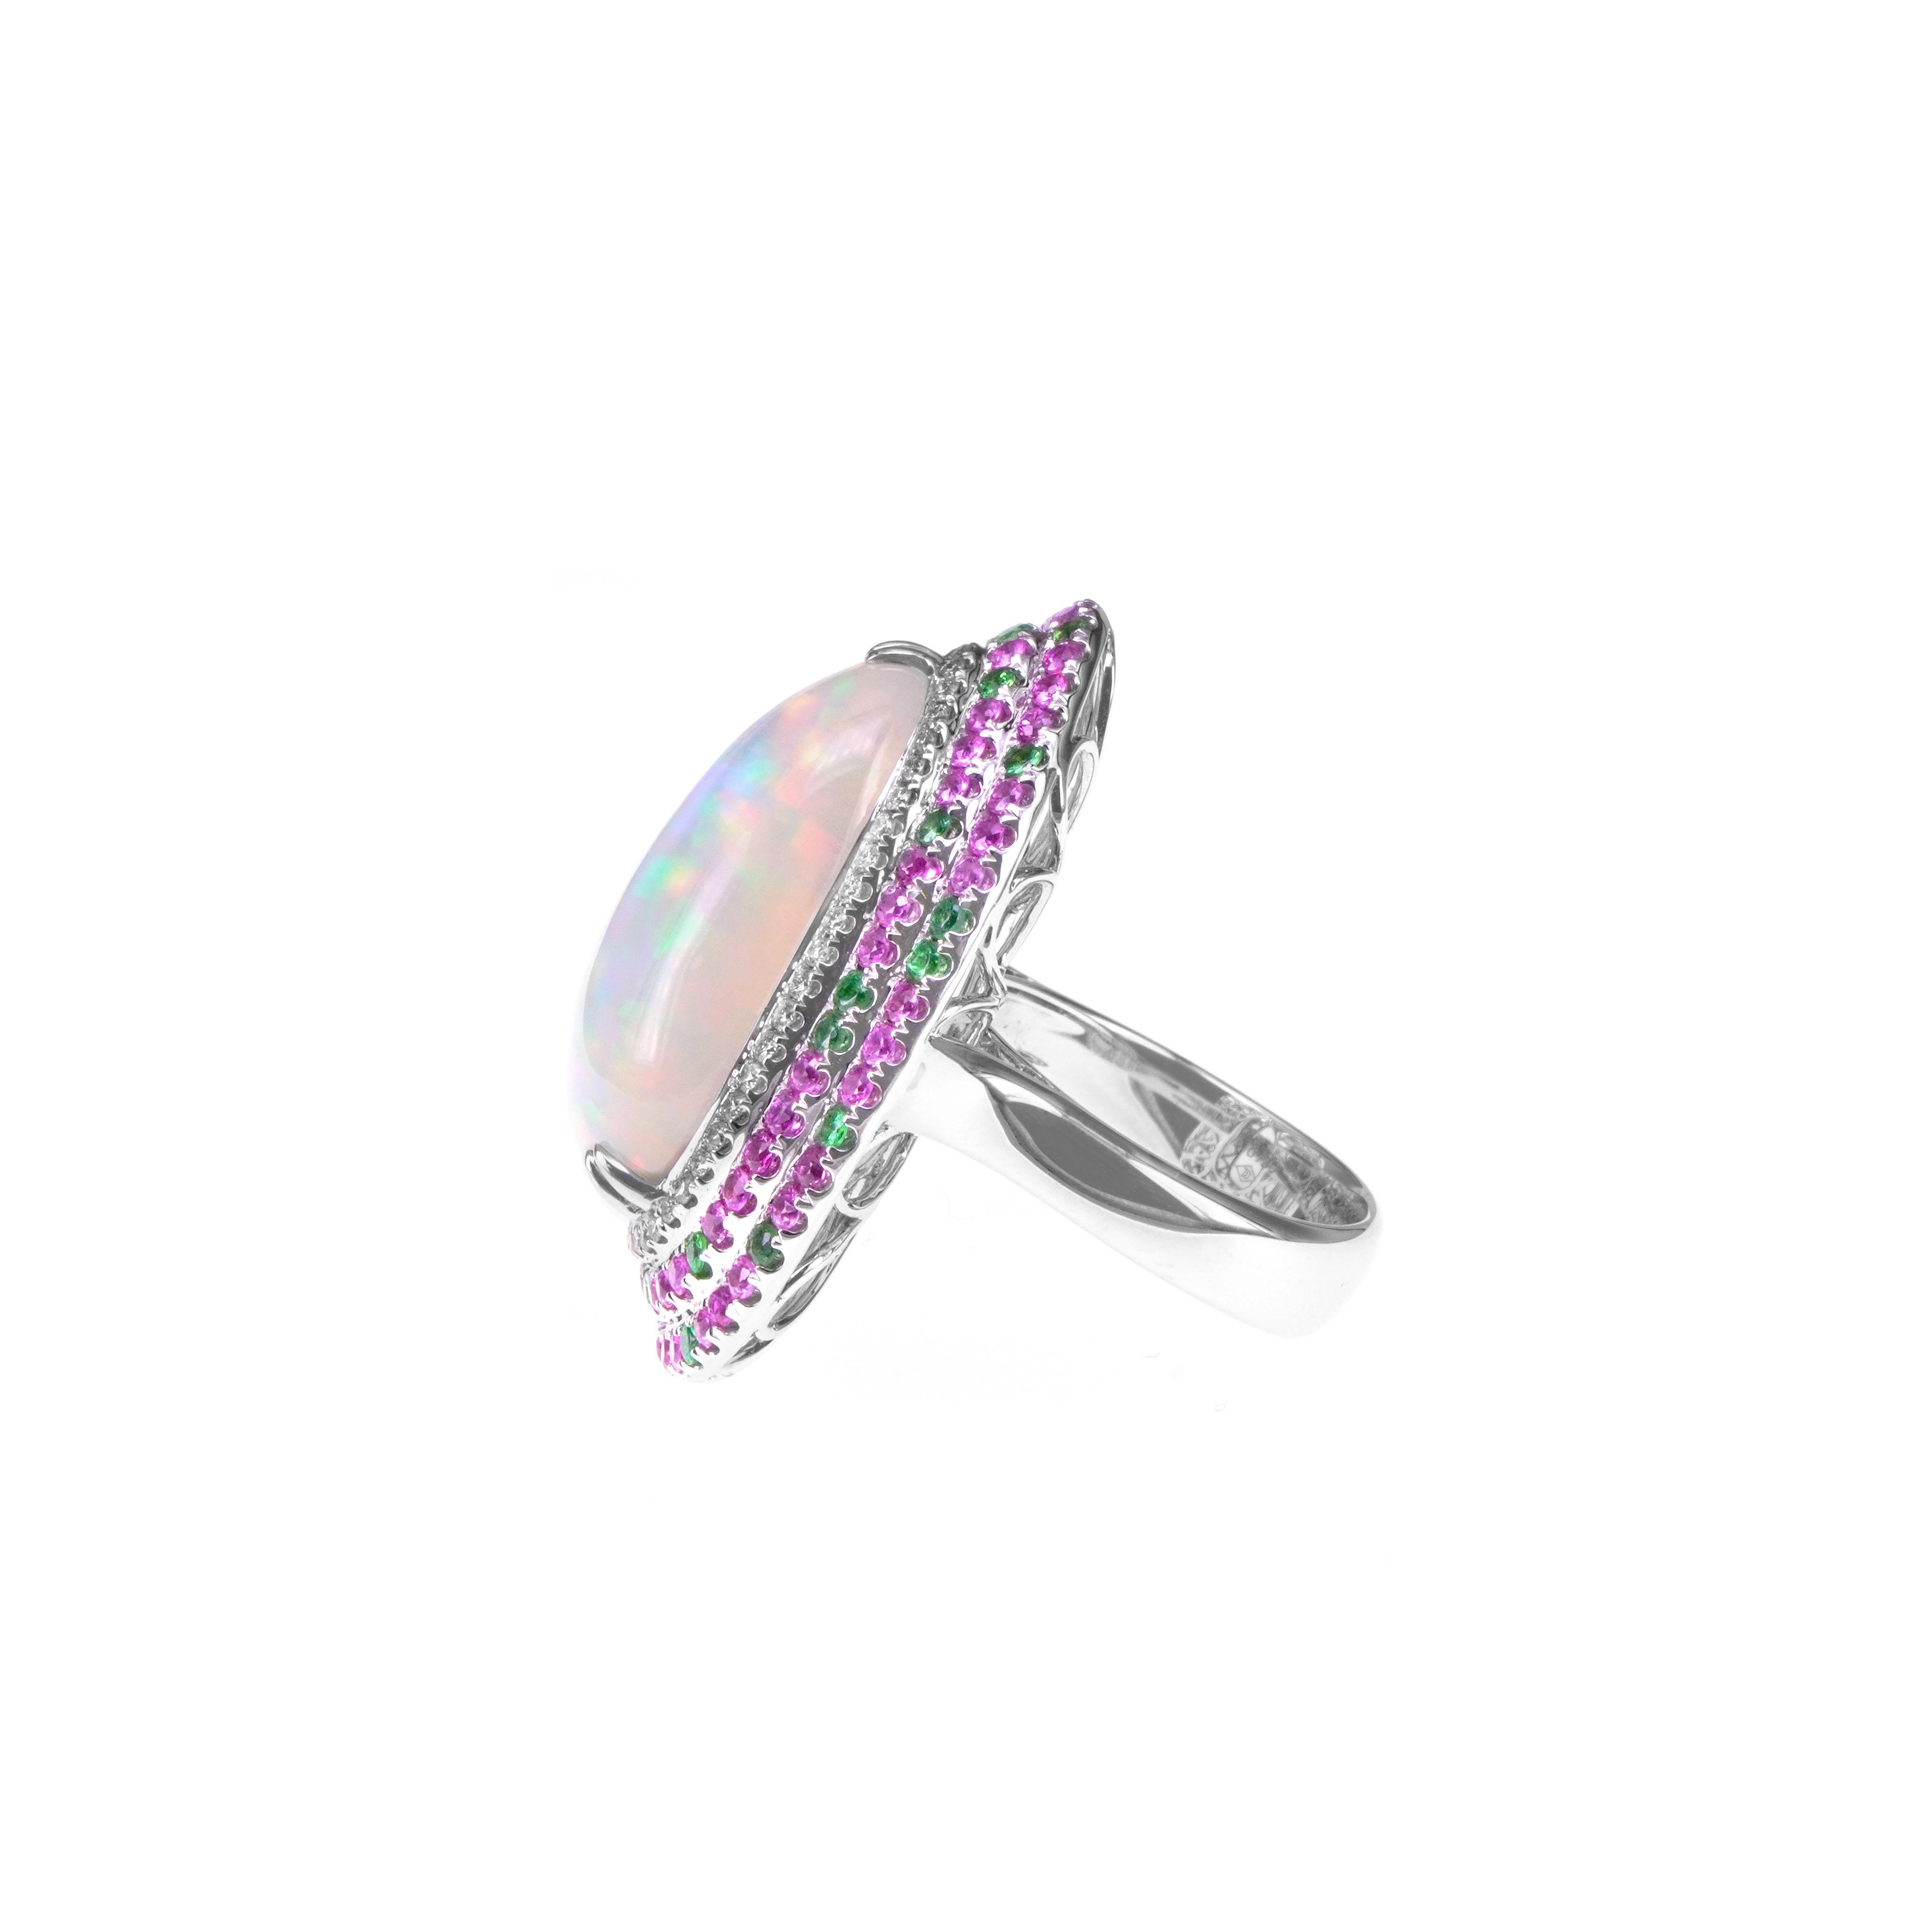 A cocktail of various stone, this ring consists of 13.48 carat of the best of Colorful pattern opal, 1.18 carat of vivid pink sapphire, 0.50 carat of vivid green Tsavorite and 0.31 carat of white round brilliant diamond. The details of the ring are